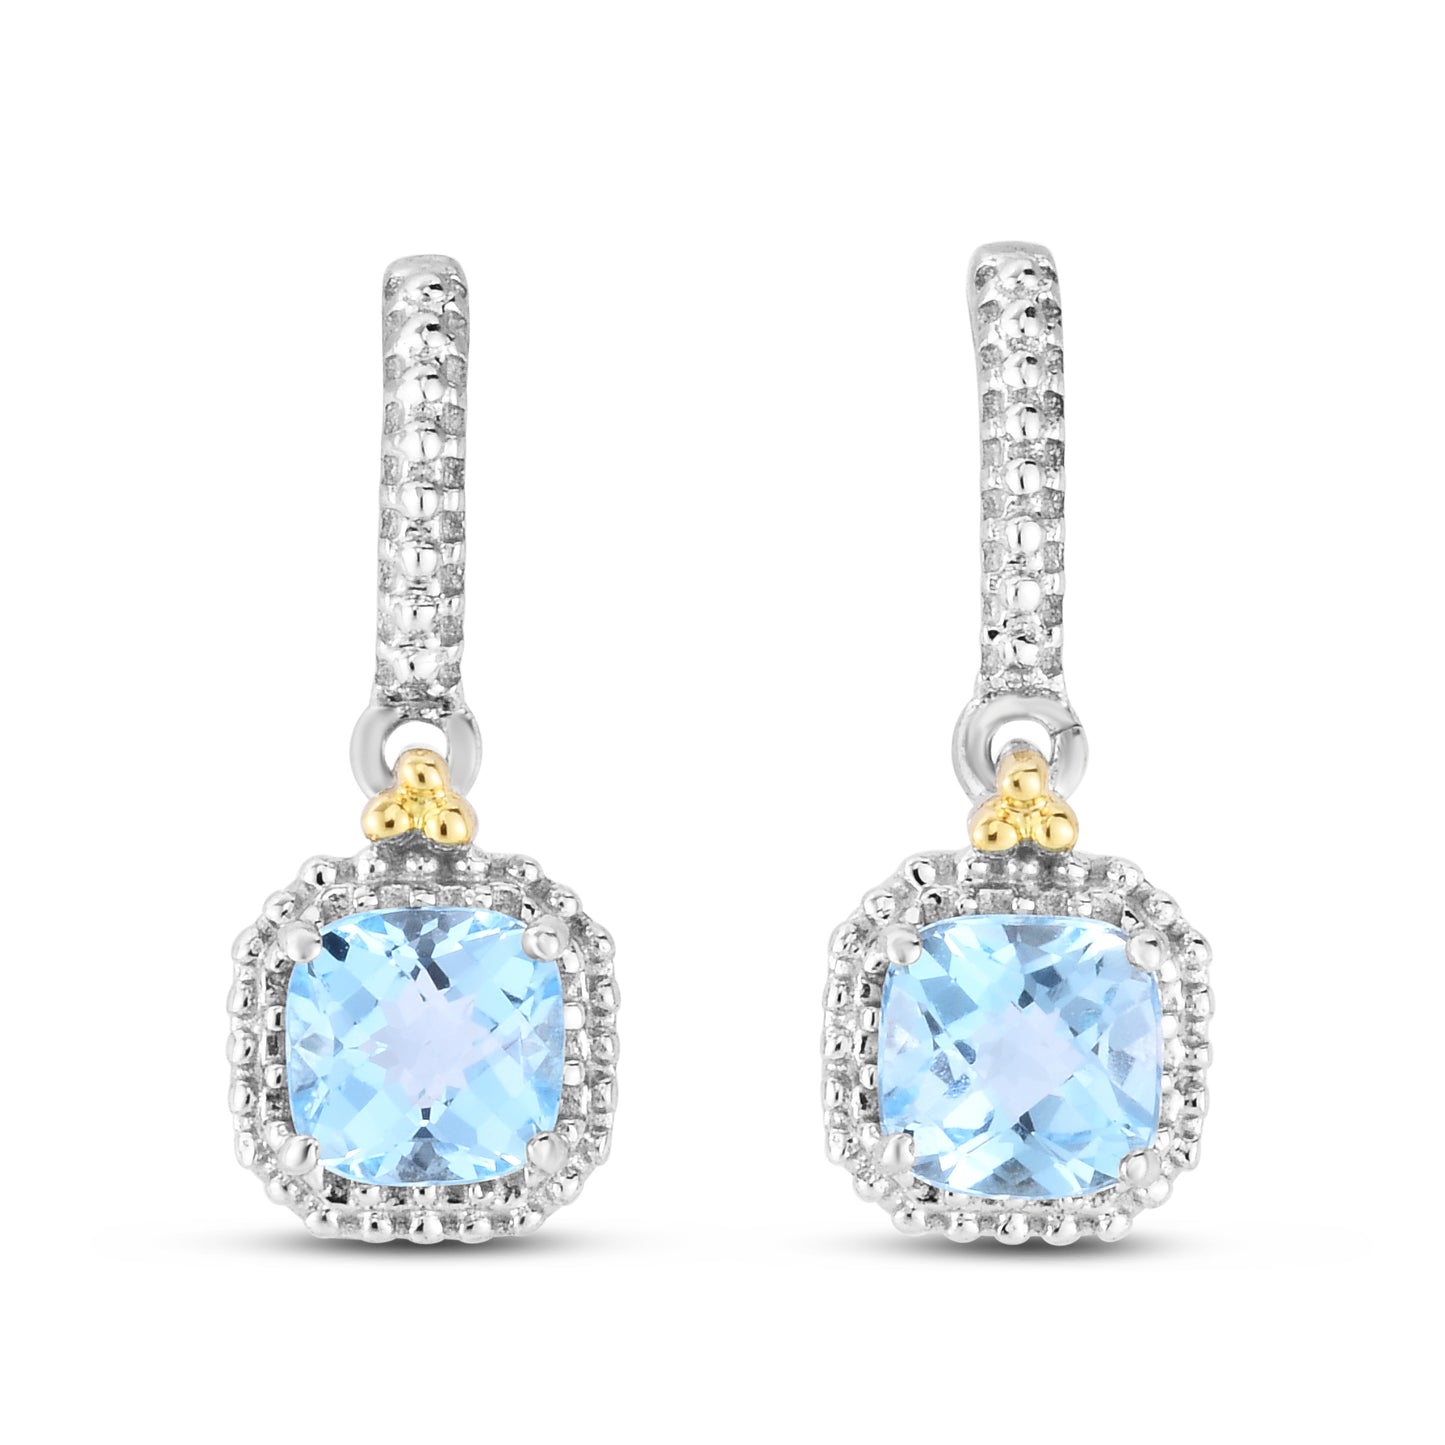 18K Gold & Silver Square Drop Popcorn Earring with 5mm Cushion Light Swiss Blue Topaz